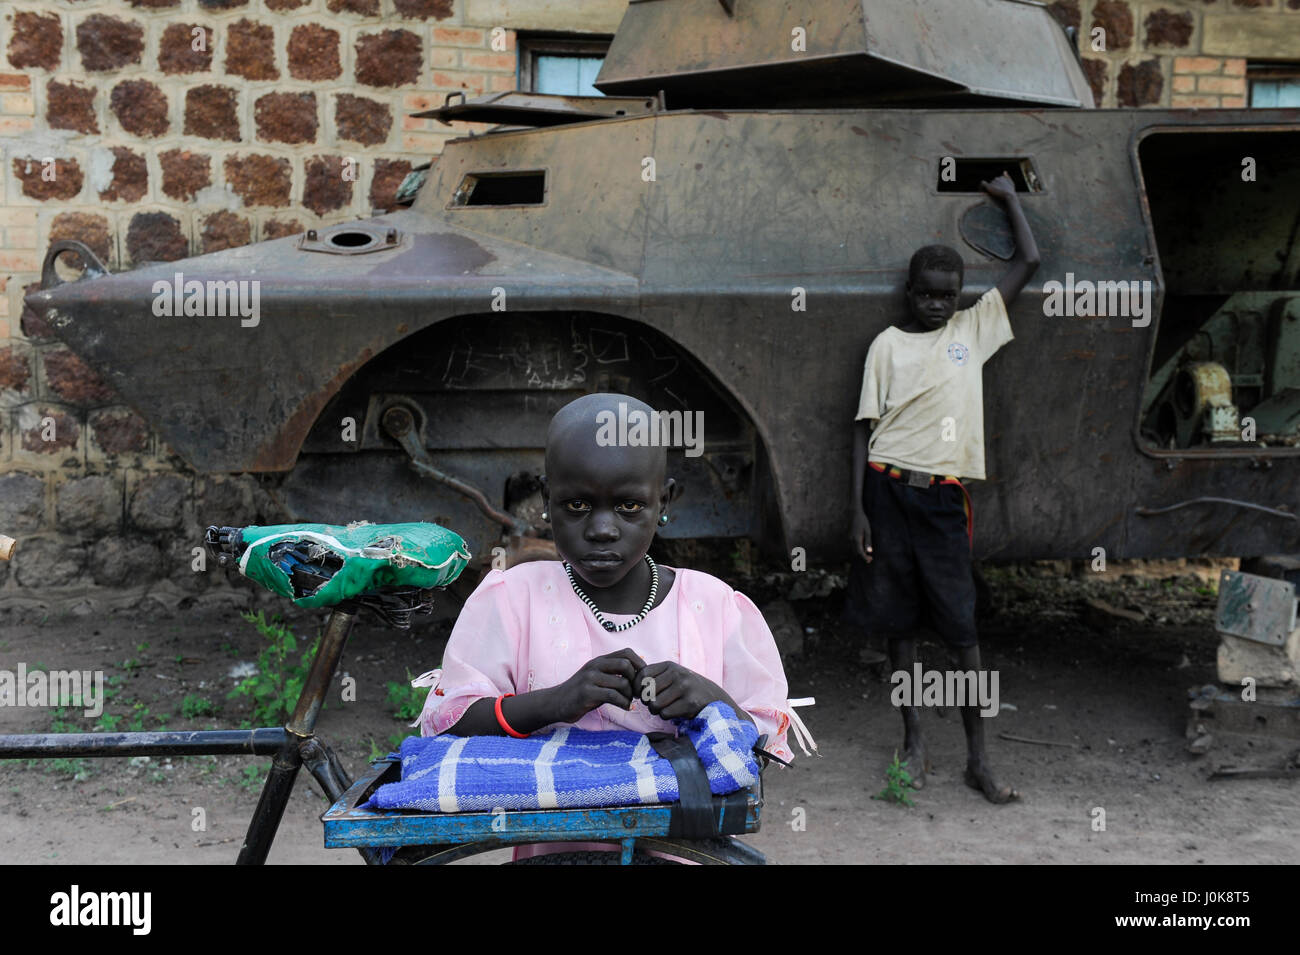 SOUTH SUDAN, Lakes State, town Rumbek, abandoned wreck of armoured personnel wagon Cadillac Gage V-150 Commando, Made in USA, from second sudanese civil war between south sudanese peoples liberation army SPLA and Sudanese Armed Forces SAF at former SAF barracks, girl with bicycle Stock Photo